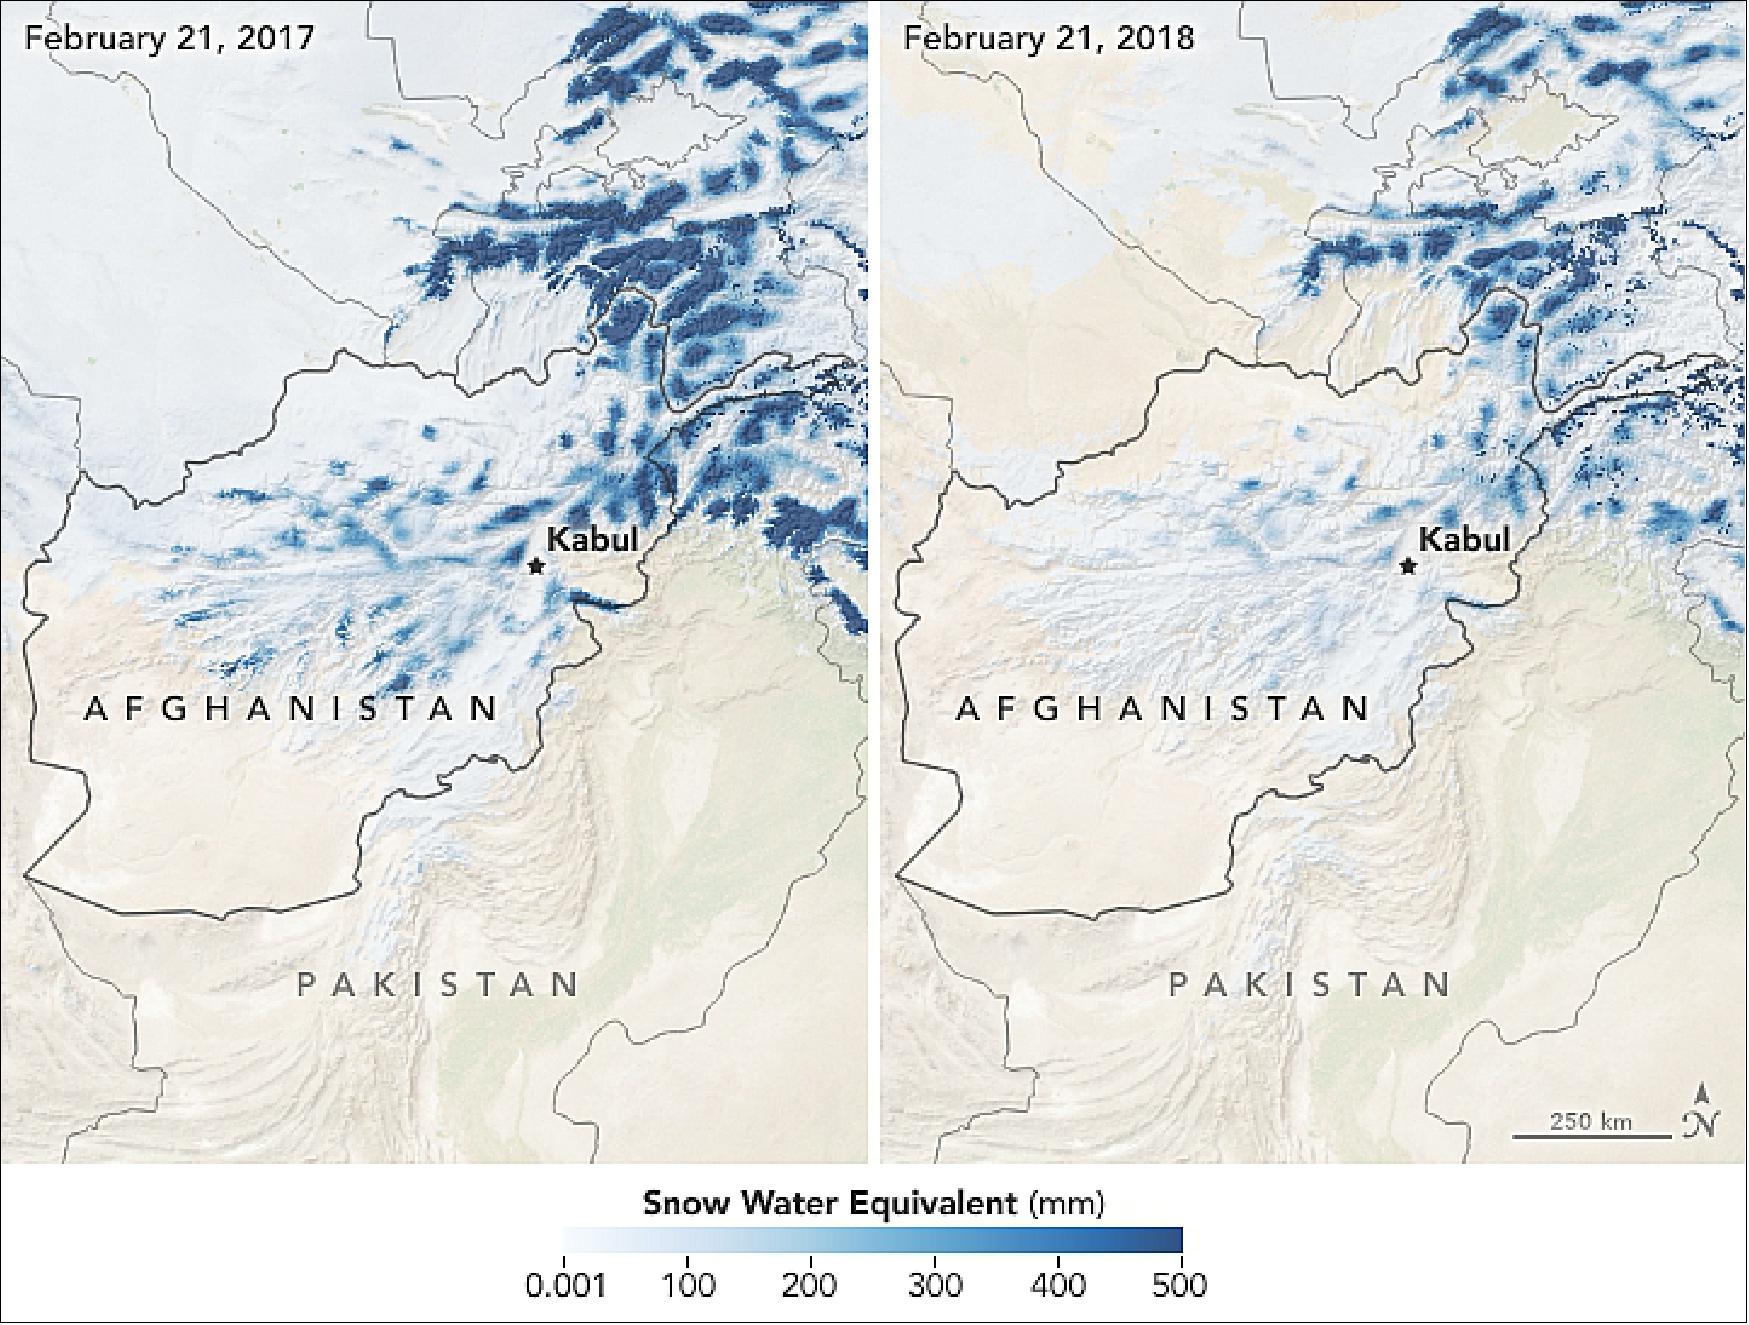 Figure 79: The Aqua satellite image on the right shows conditions on February 21, 2018, amid a low snowpack; the left map shows conditions on February 21, 2017 (image credit: NASA Earth Observatory, images by Joshua Stevens, using LSM (Land-Surface Model) data courtesy of Amy McNally, Jossy Jacob, and the NASA Land Information System, and temperature anomalies from the Early Warning and Environmental Monitoring (EWEM) program at the USGS, story by Kathryn Hansen)